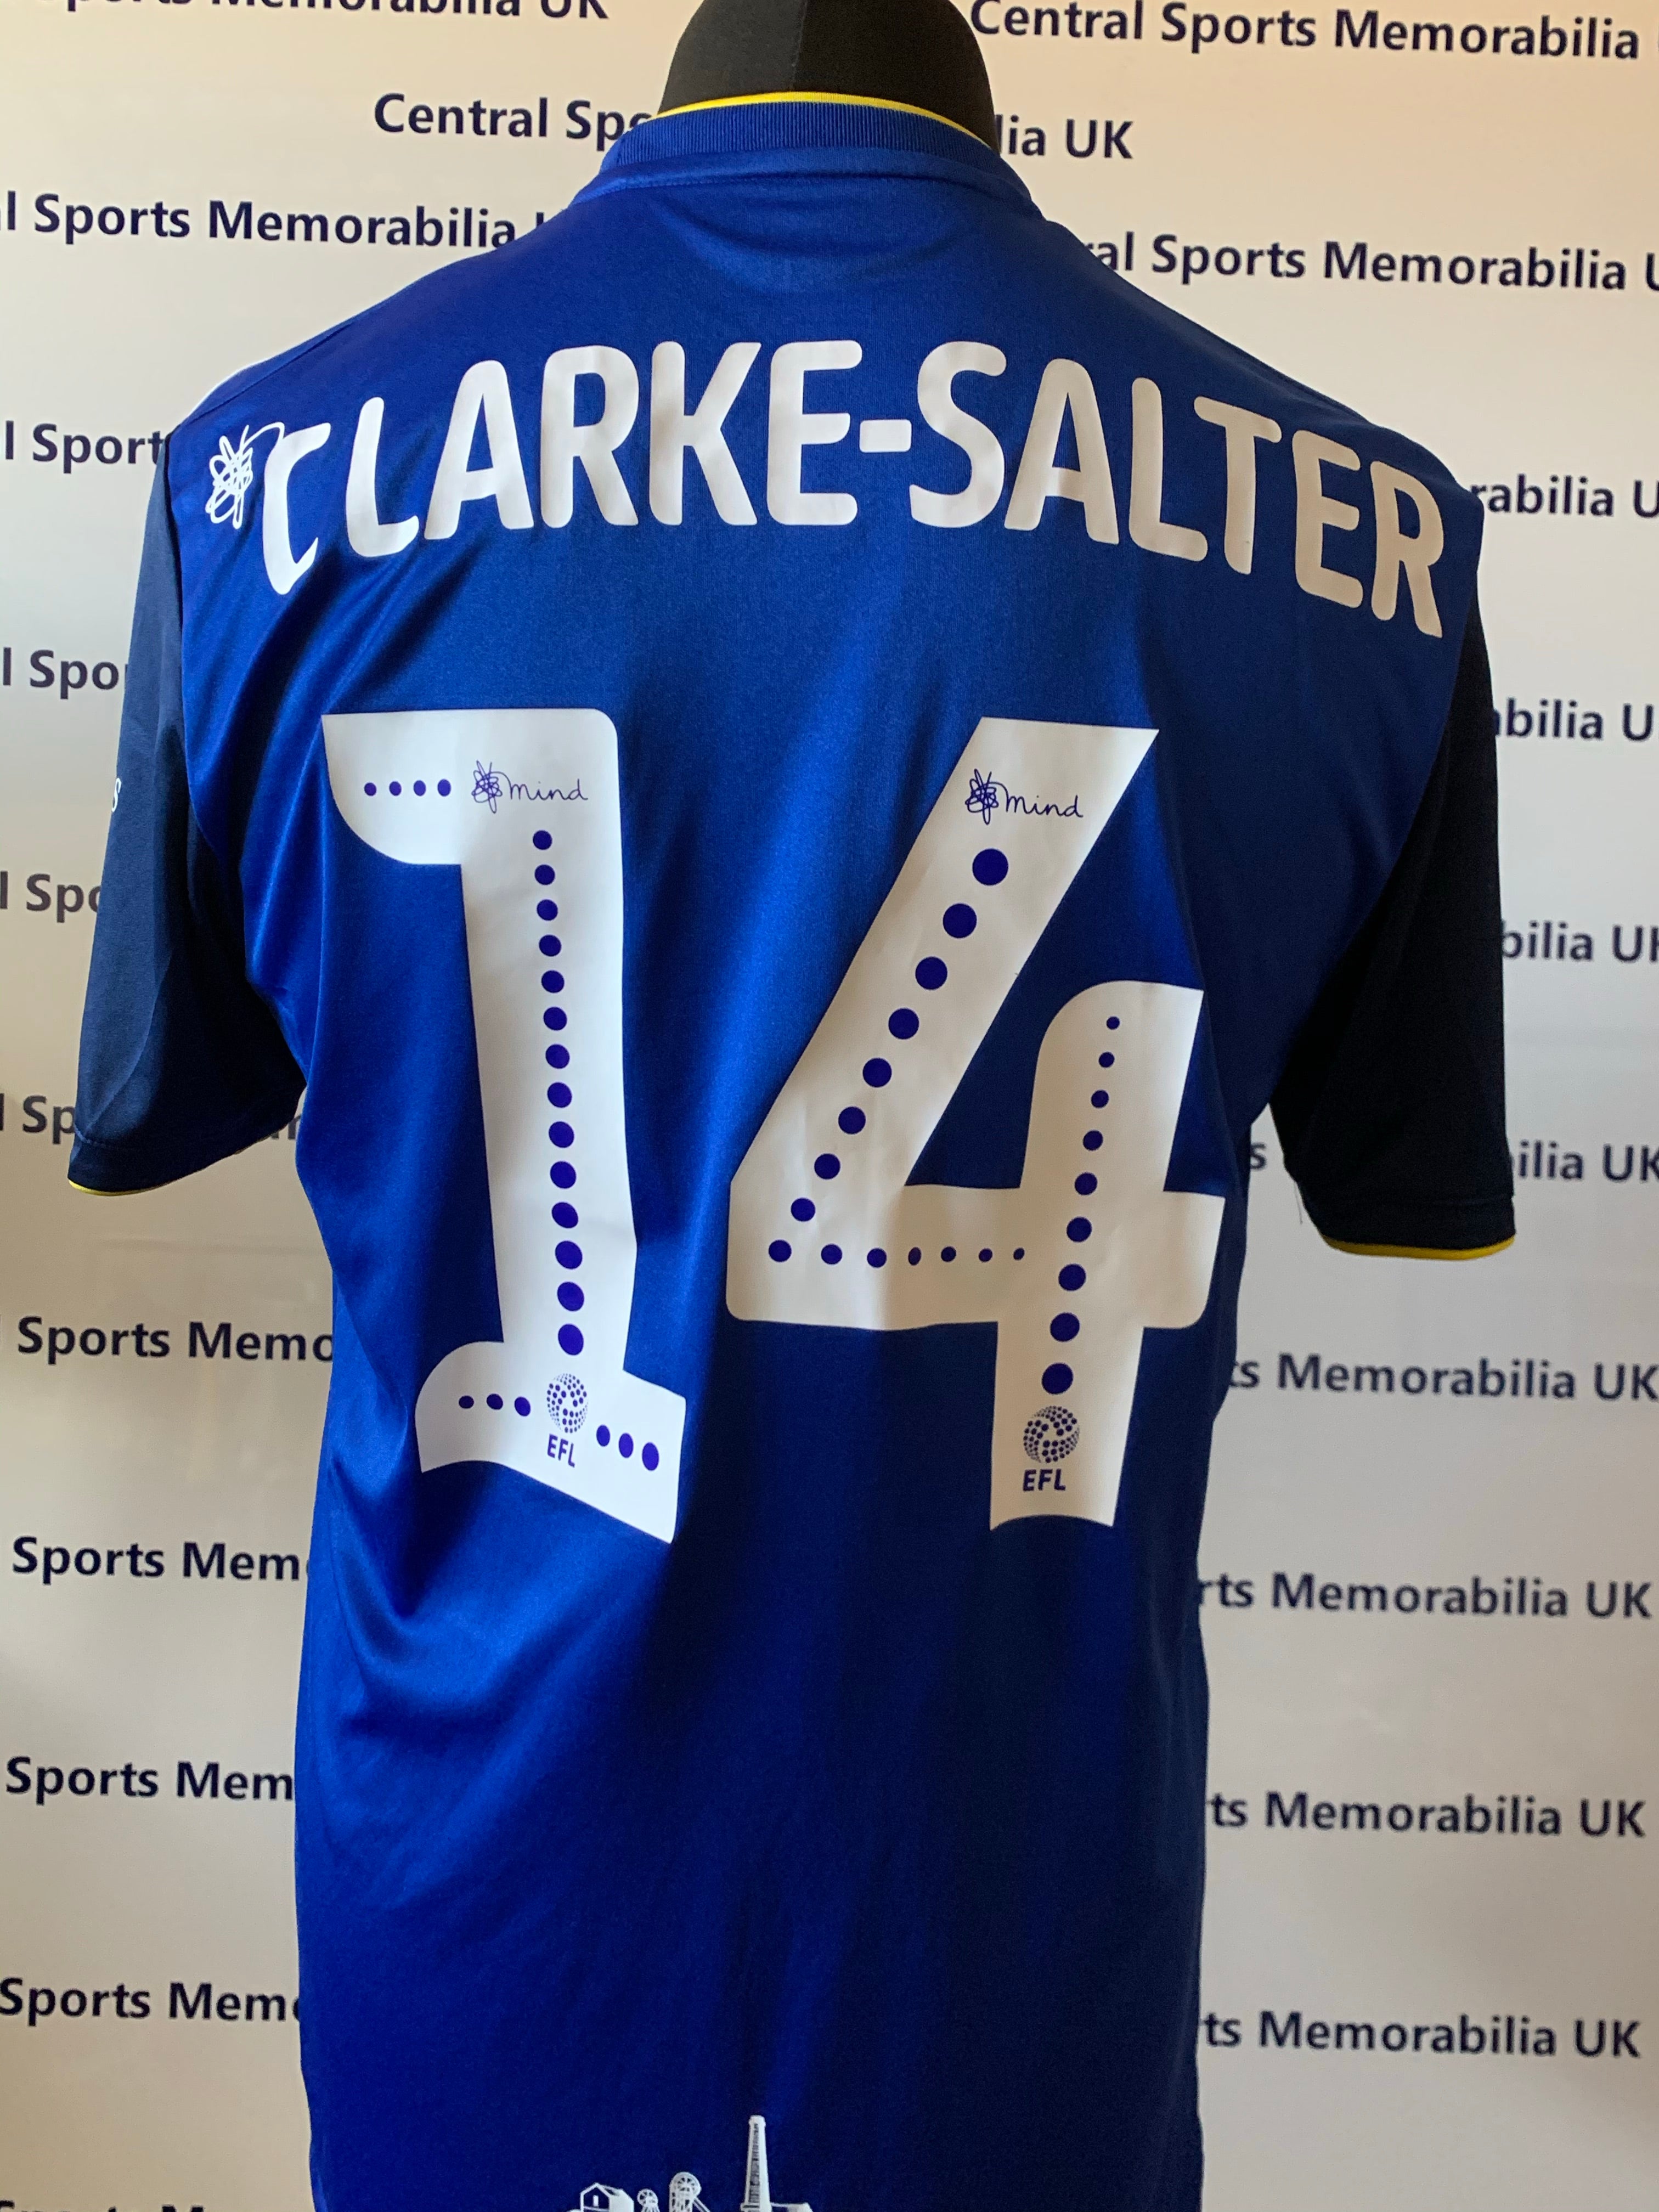 Jake Clarke-Salter Match Issue FA Cup Shirt.